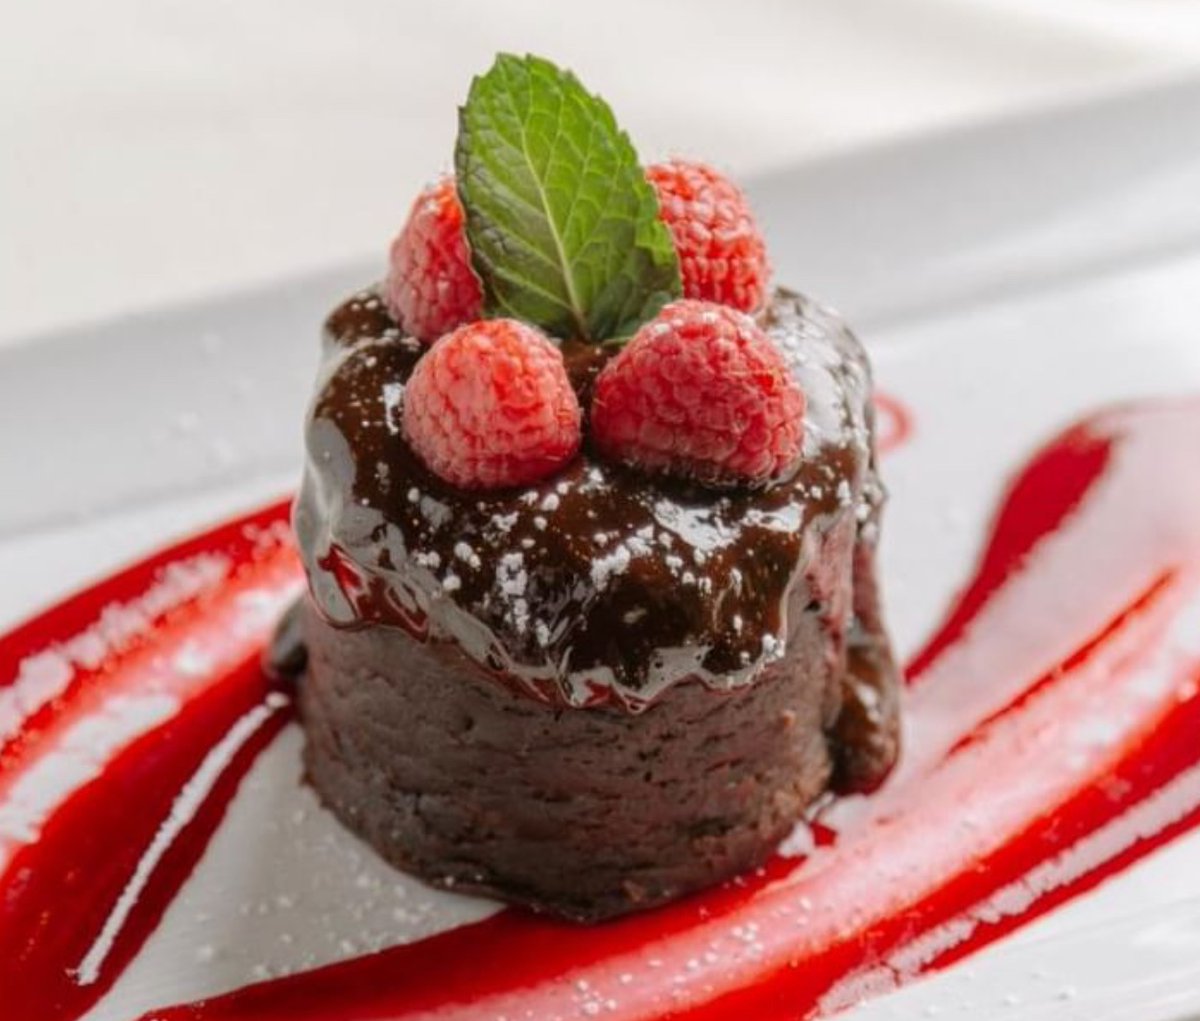 It’s #foodiefriday and #worldchocolateday. Want to try the Molten Chocolate Gâteau at 
christophers_world_grille in #bryantx? Read my article to learn more t.ly/aCo5.

#destinationbryan #bryantexas #travelwritersuniversity #ifwtwa1 @ifwtwa1 #phototraveler